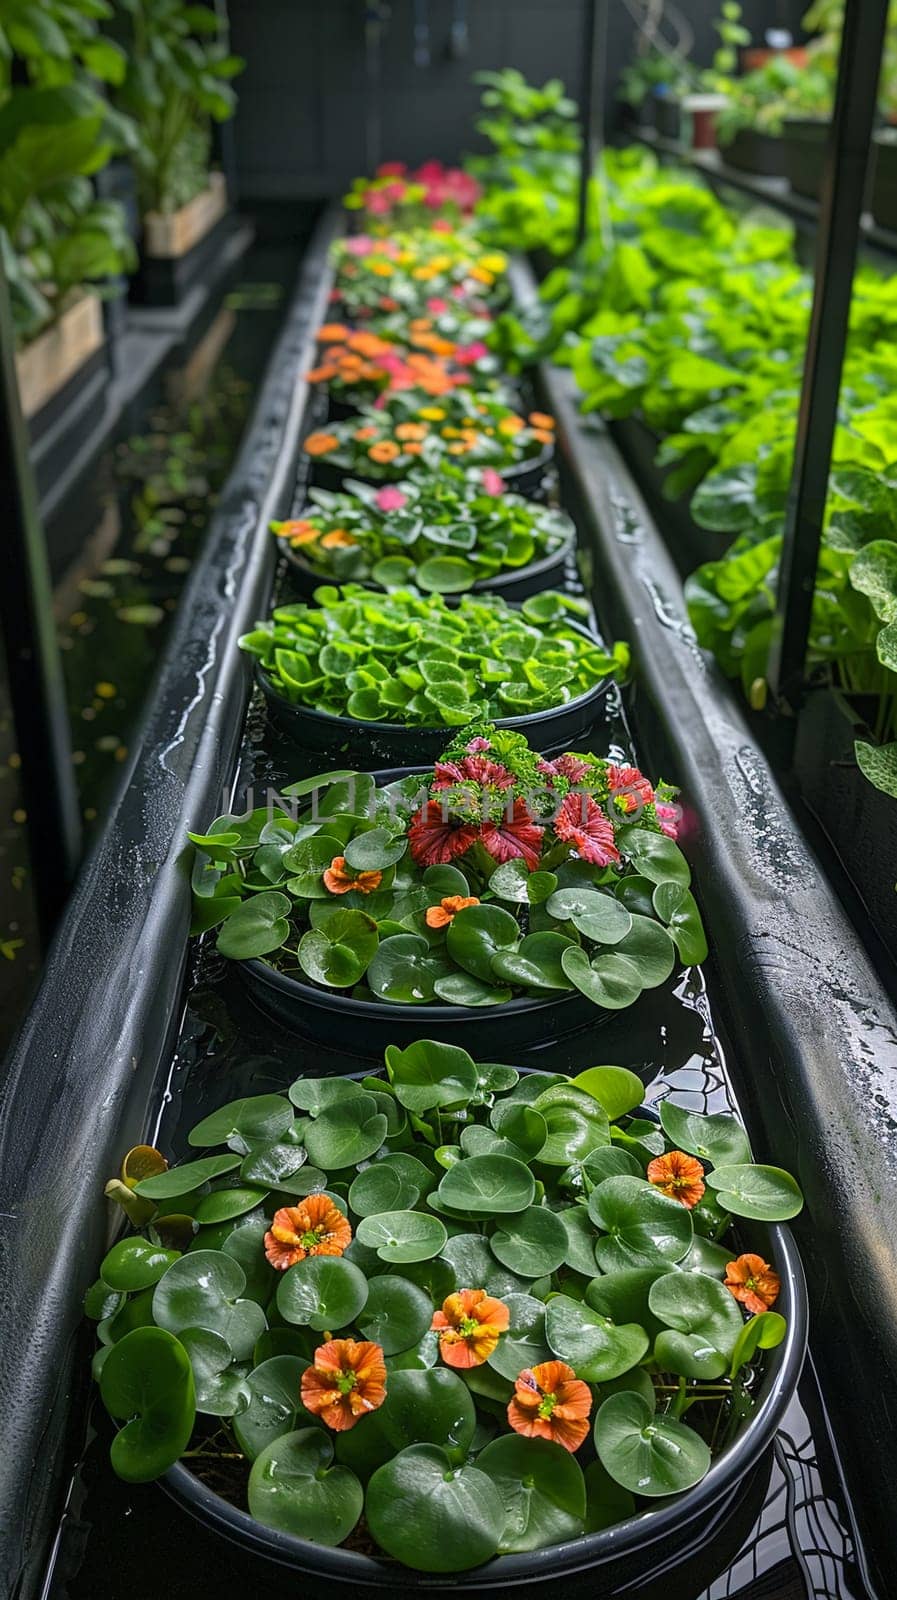 Aquaponics Innovation Leads Aquaculture in Business of Eco-Farming Futures, Aquaponic systems and green technology lead a story of aquaculture innovation and eco-farming futures in the aquaponics business.